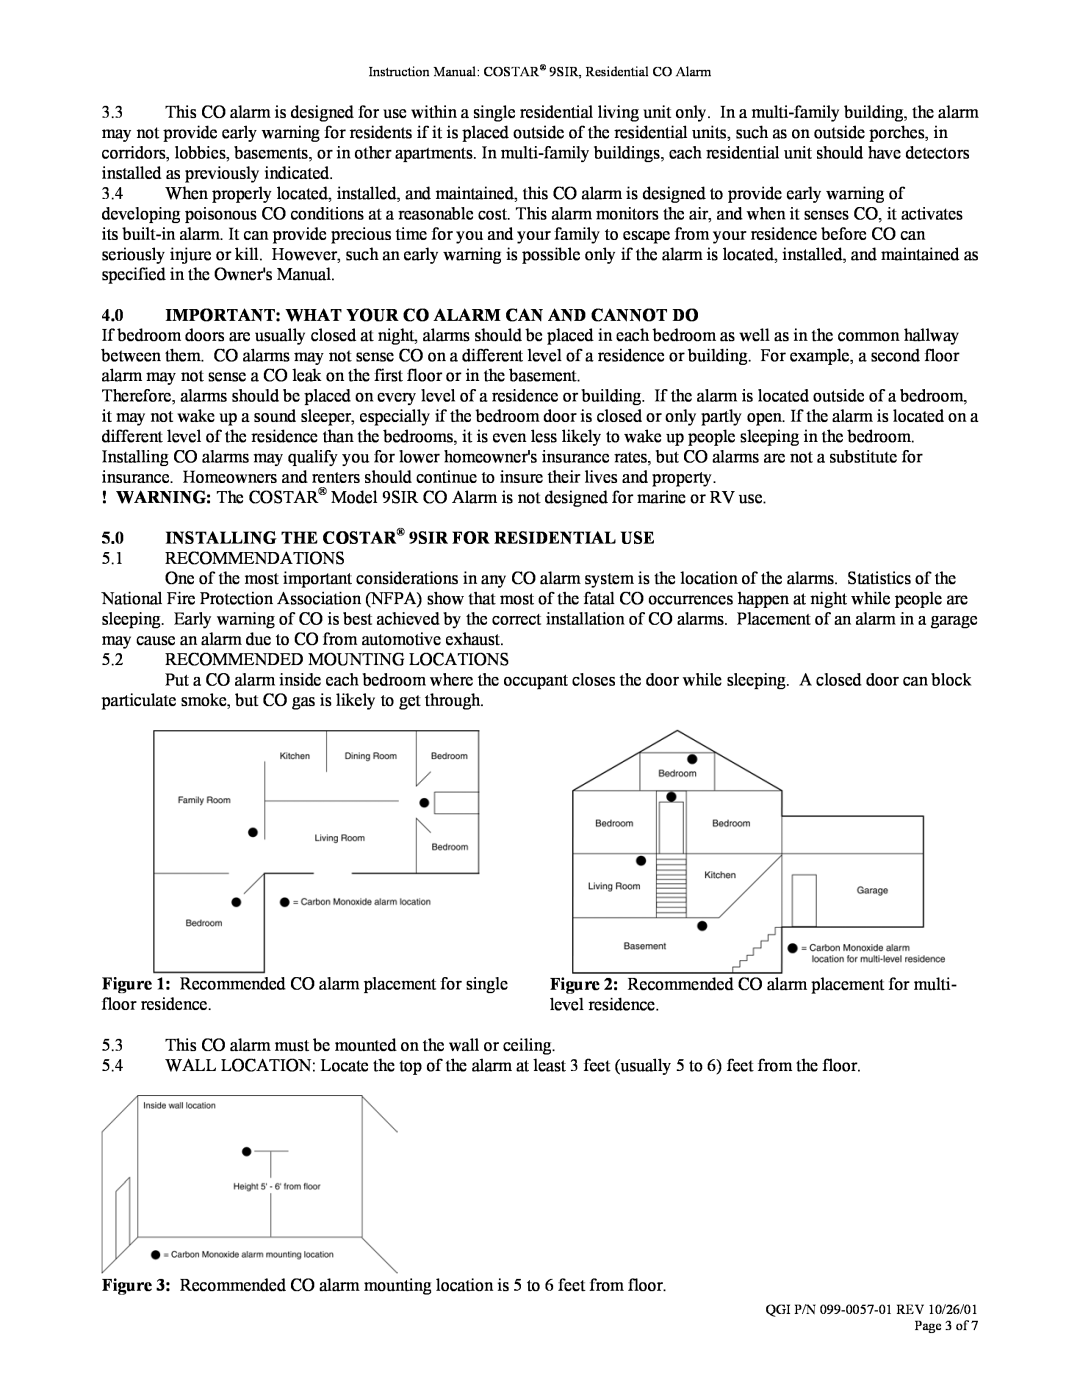 Costar owner manual 5.0INSTALLING THE COSTAR 9SIR FOR RESIDENTIAL USE 